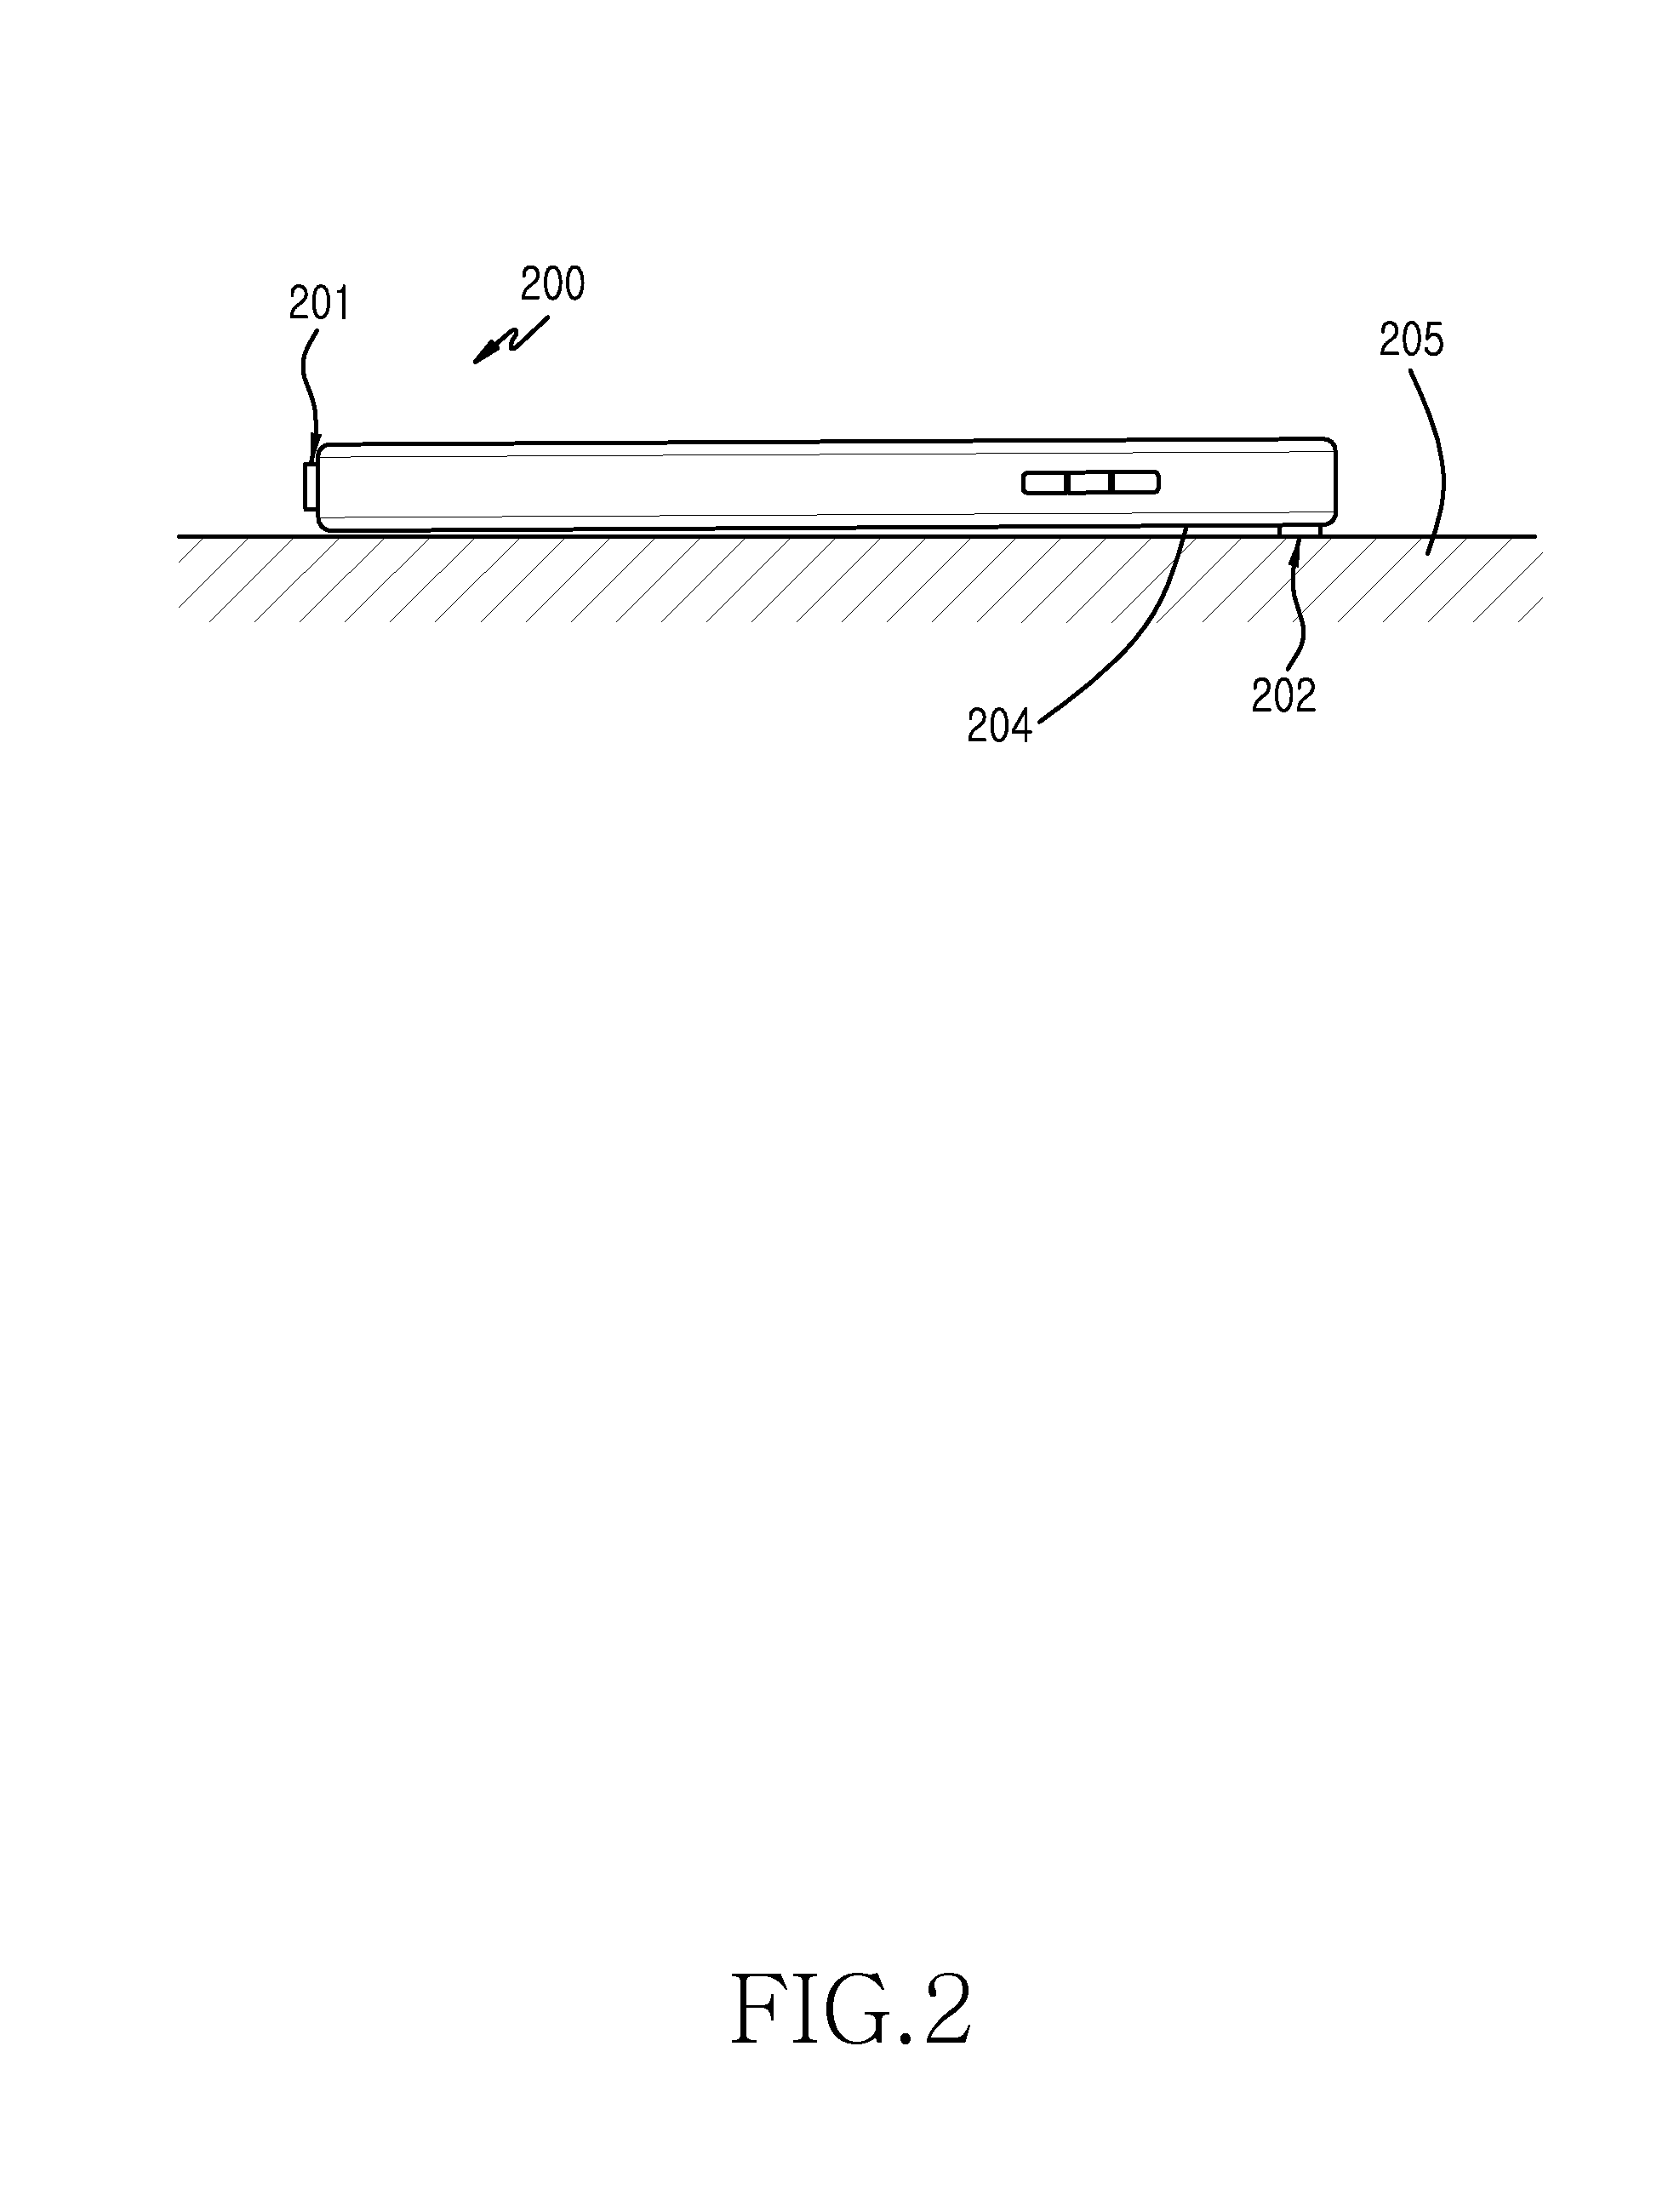 Electronic device and method for blocking echo generation by eliminating sound output from speaker